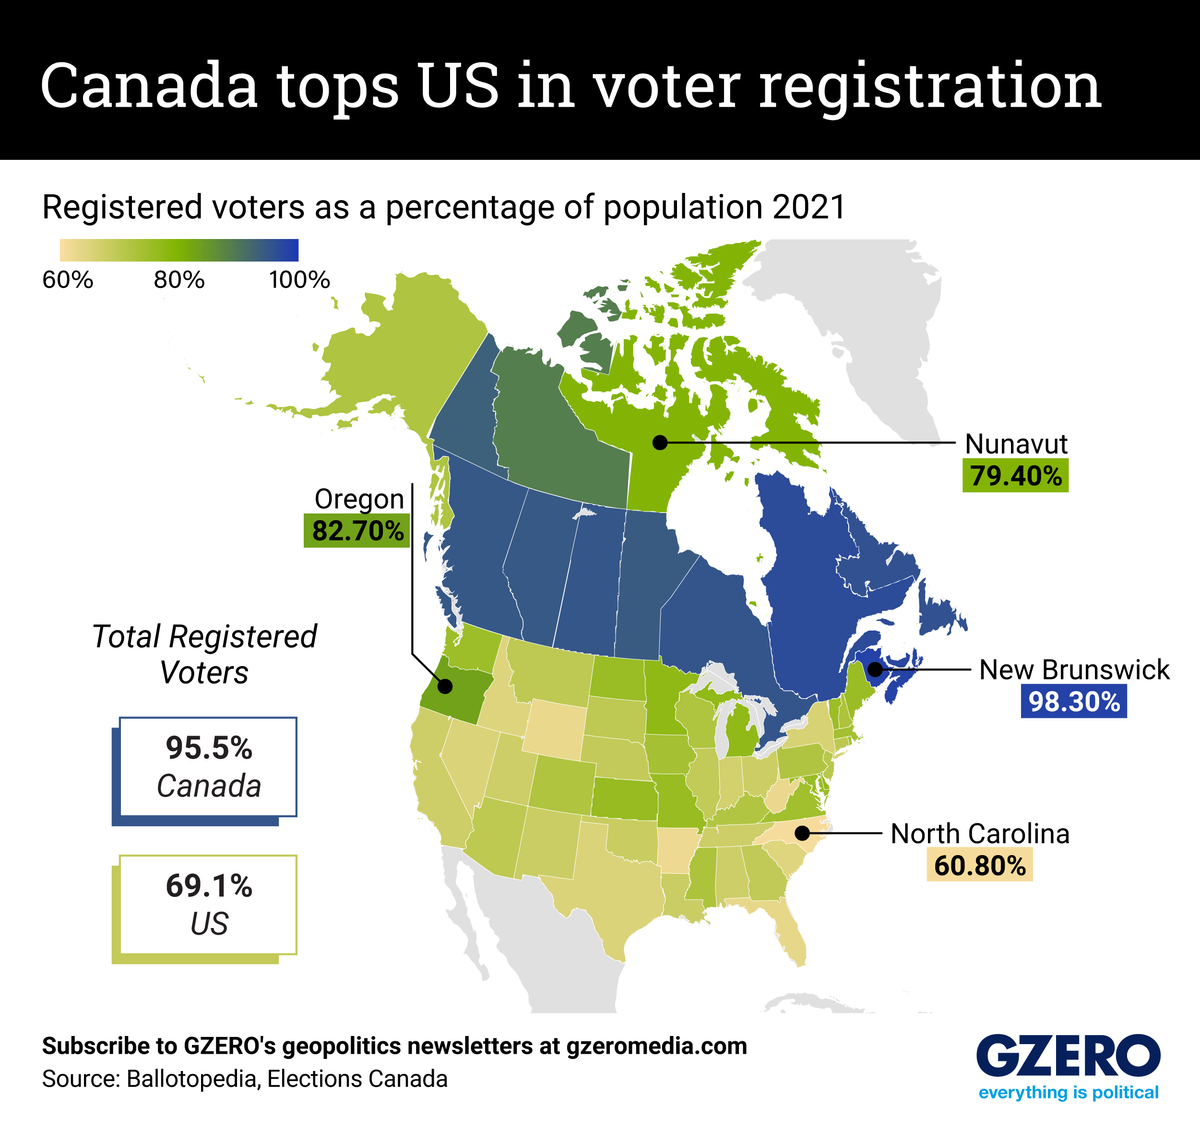 ​Heat map of Canada and US voter registration levels